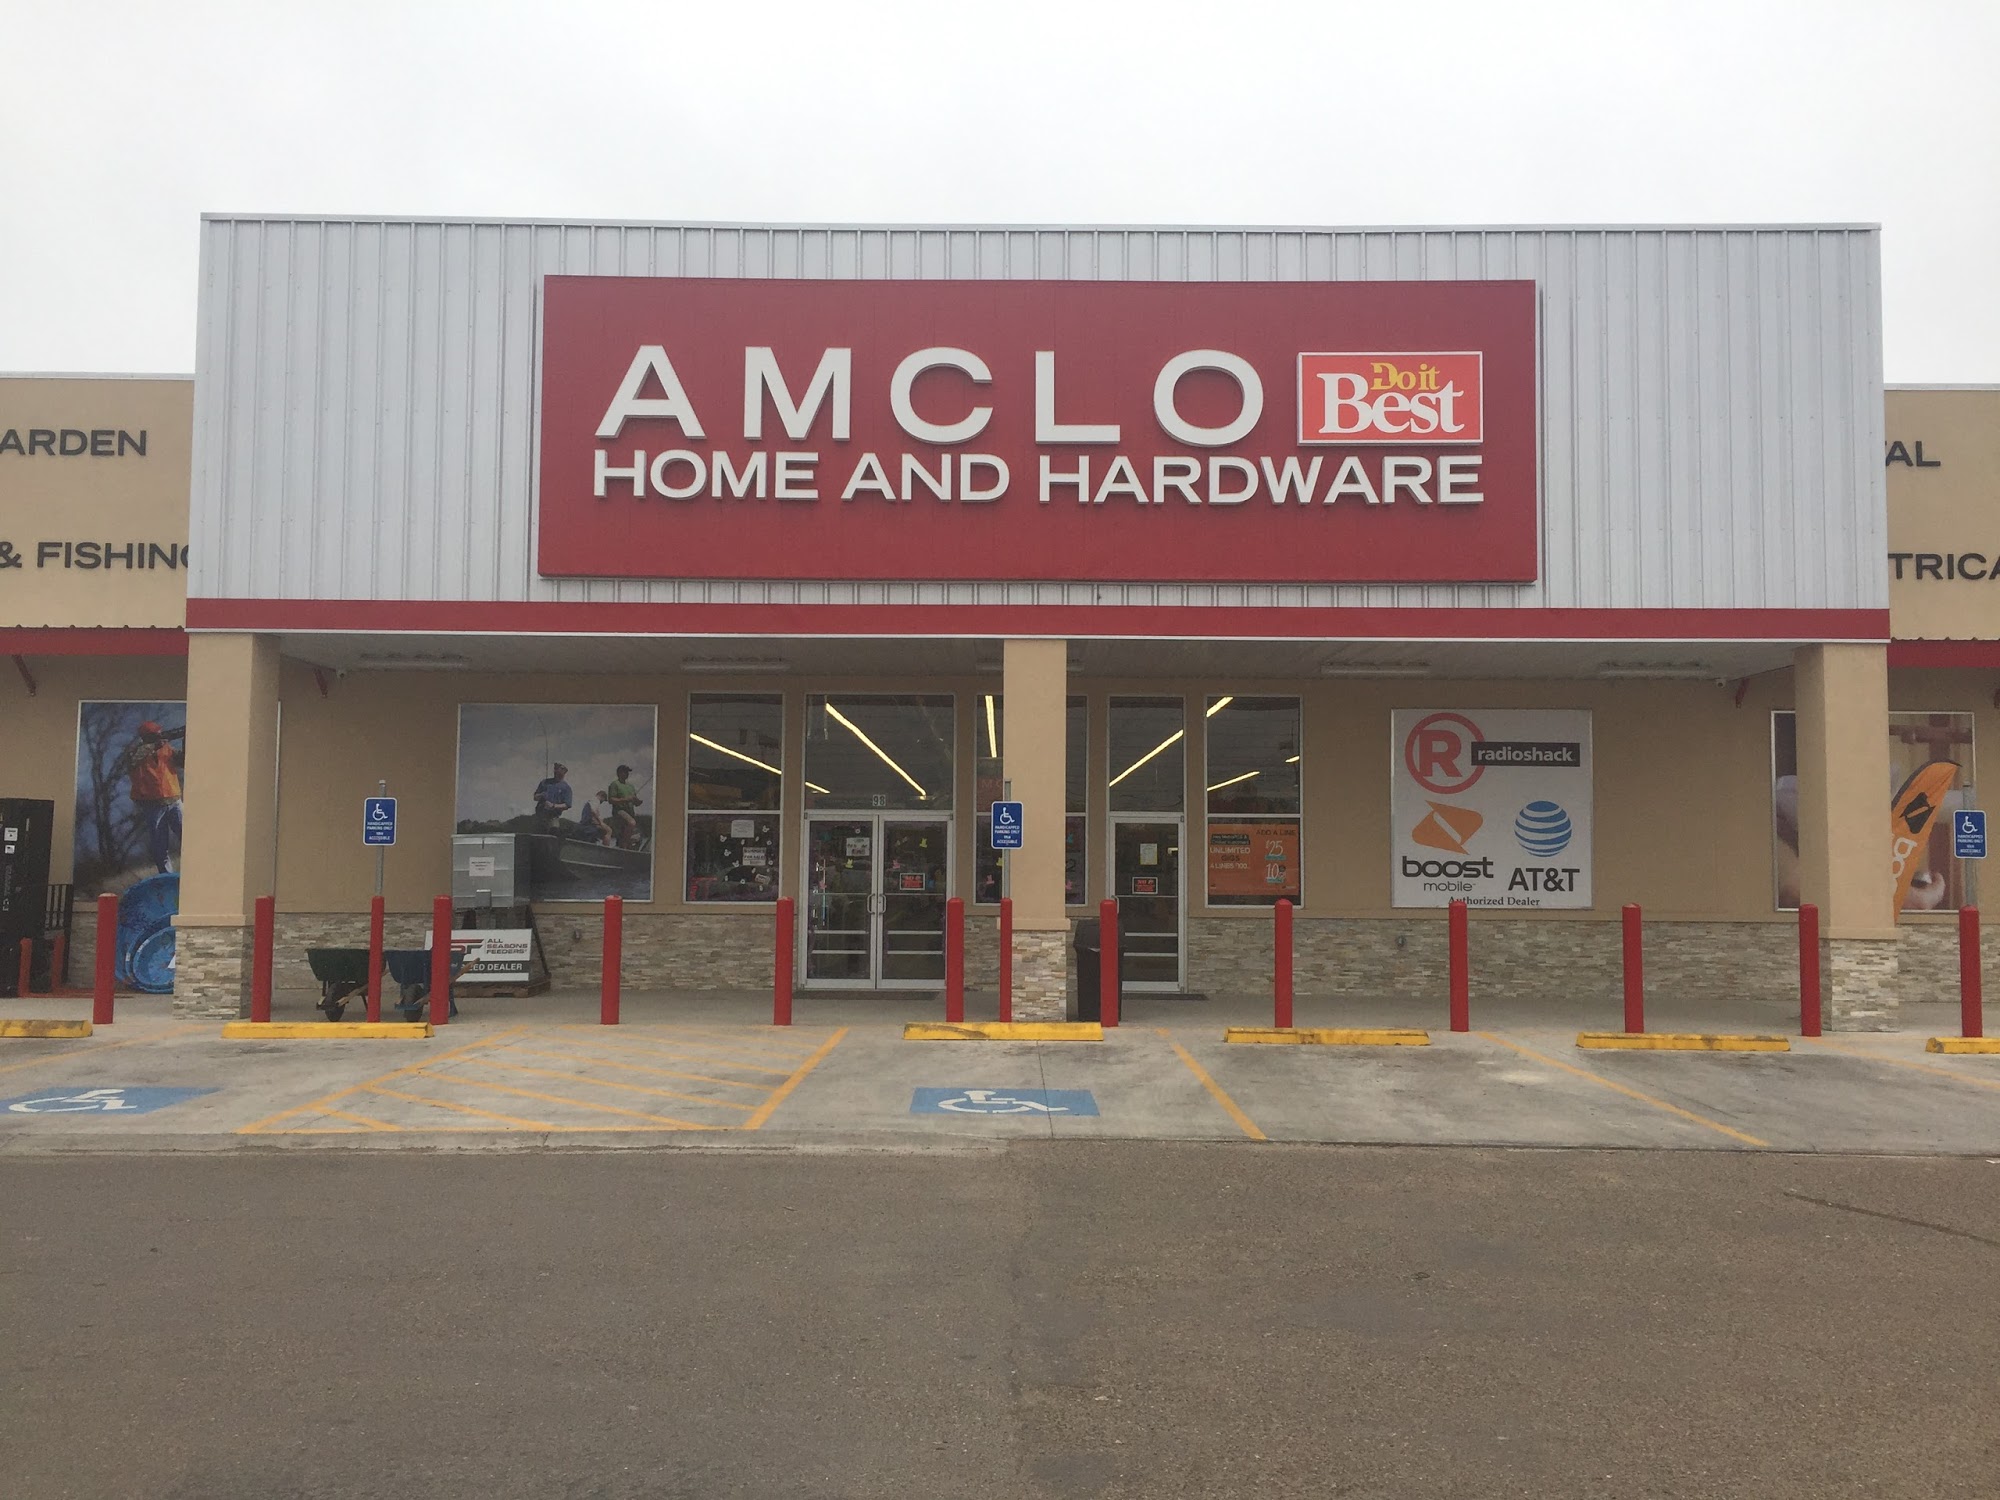 AMCLO Home and Hardware